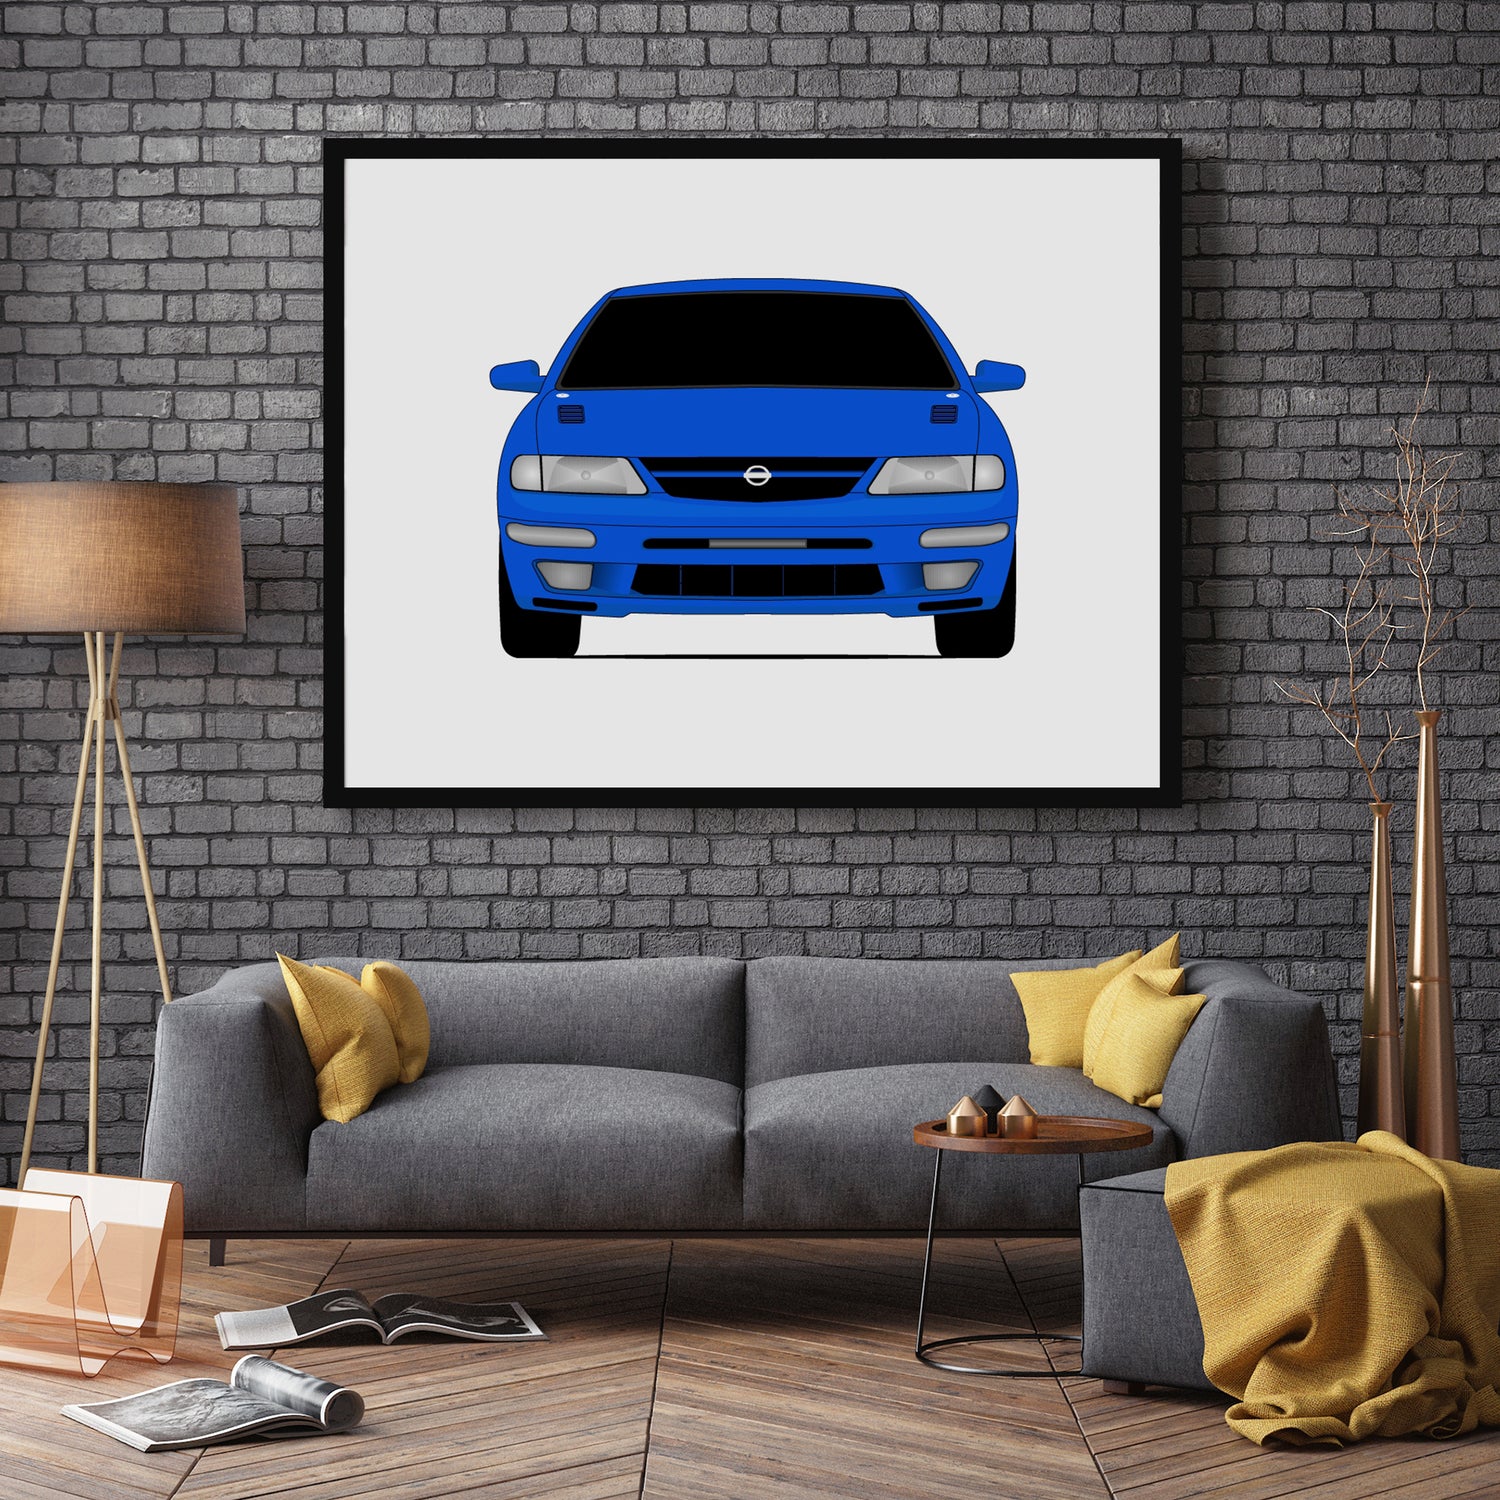 Opel Vectra Tuning Posters for Sale